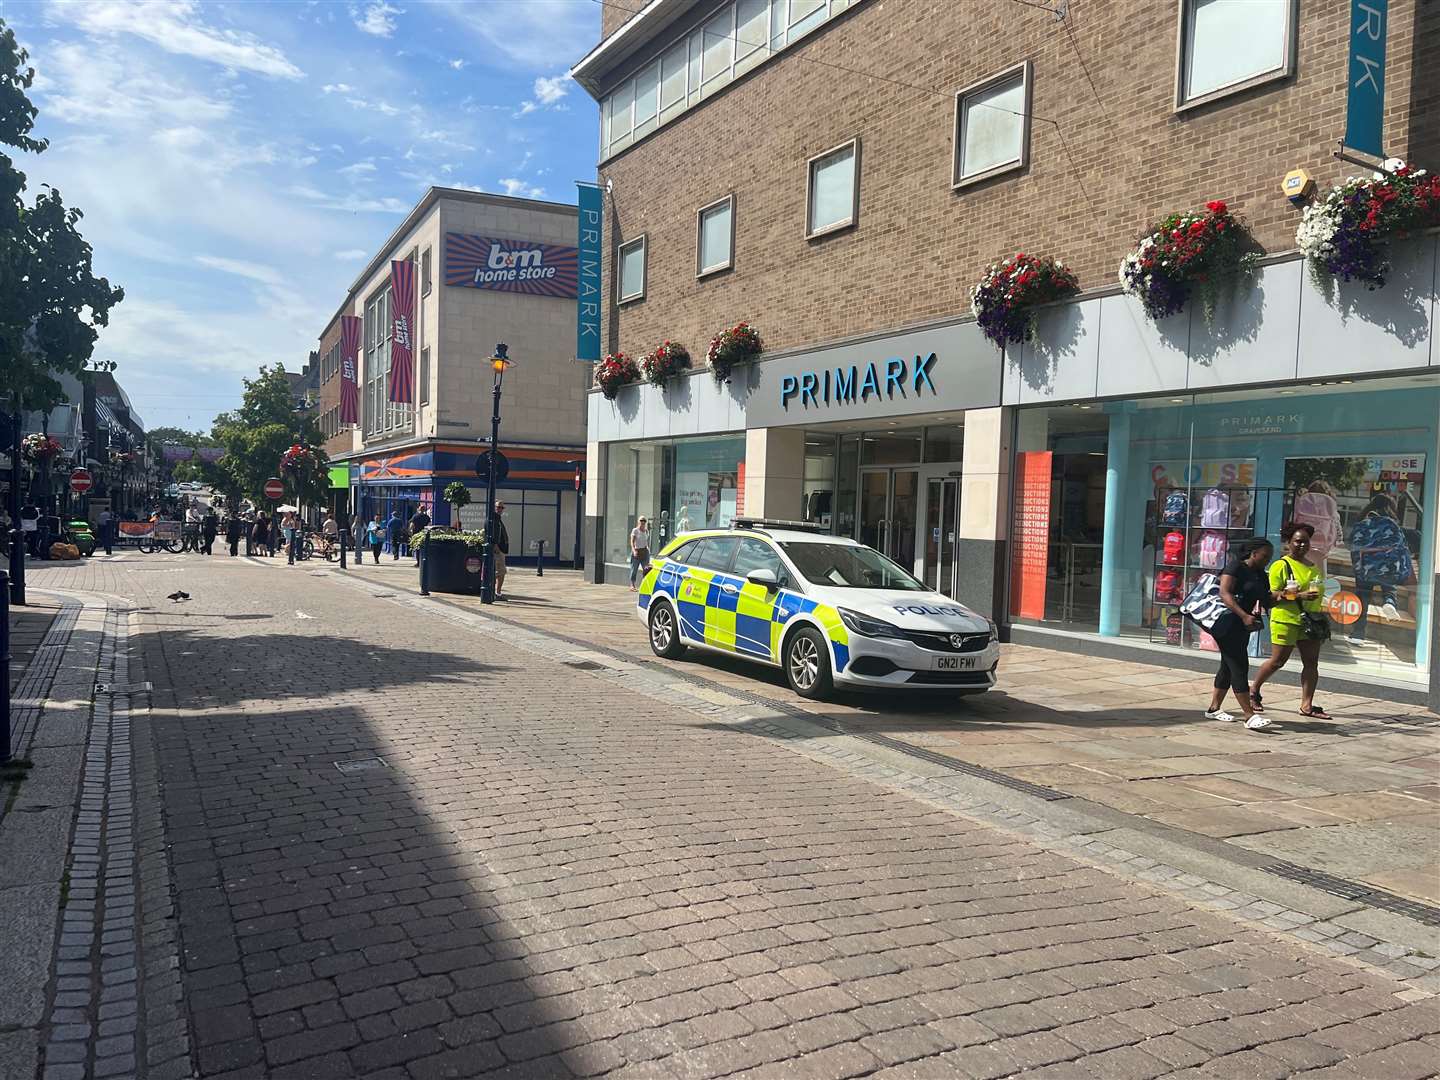 Police officers have been patrolling the town centre as part of their work. Stock picture